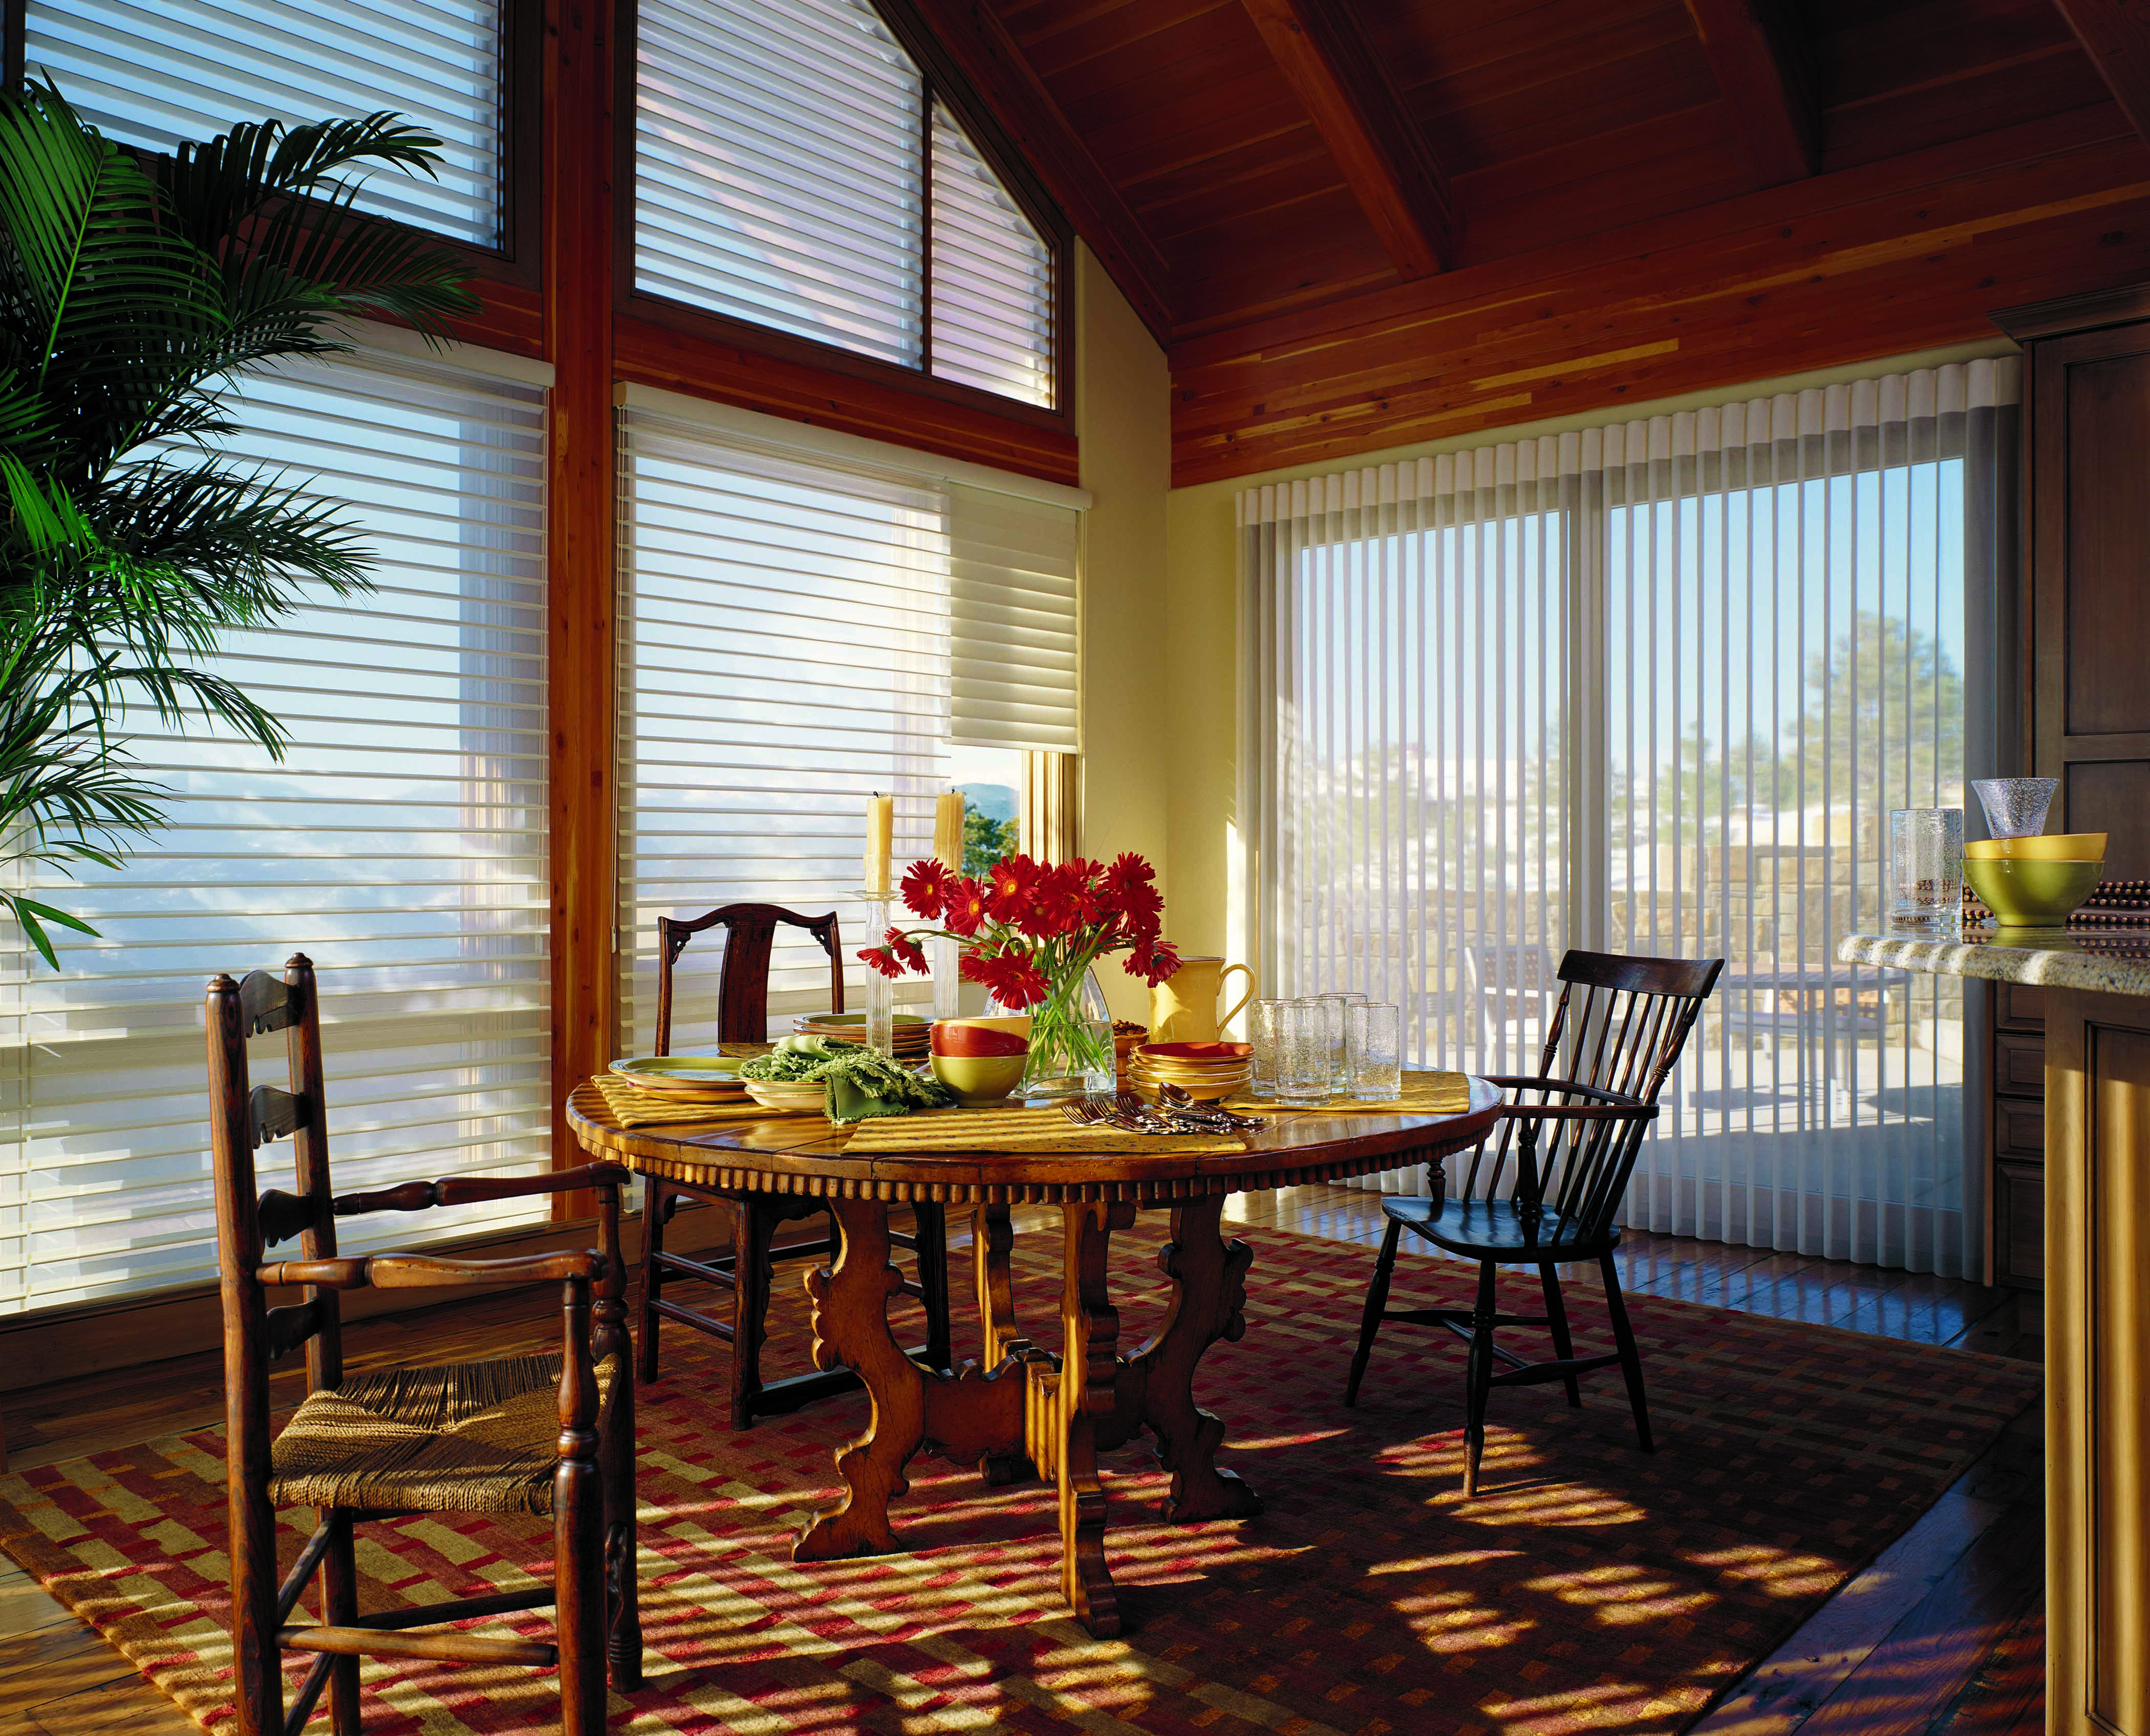 3 Reasons to Customize your Window Treatments